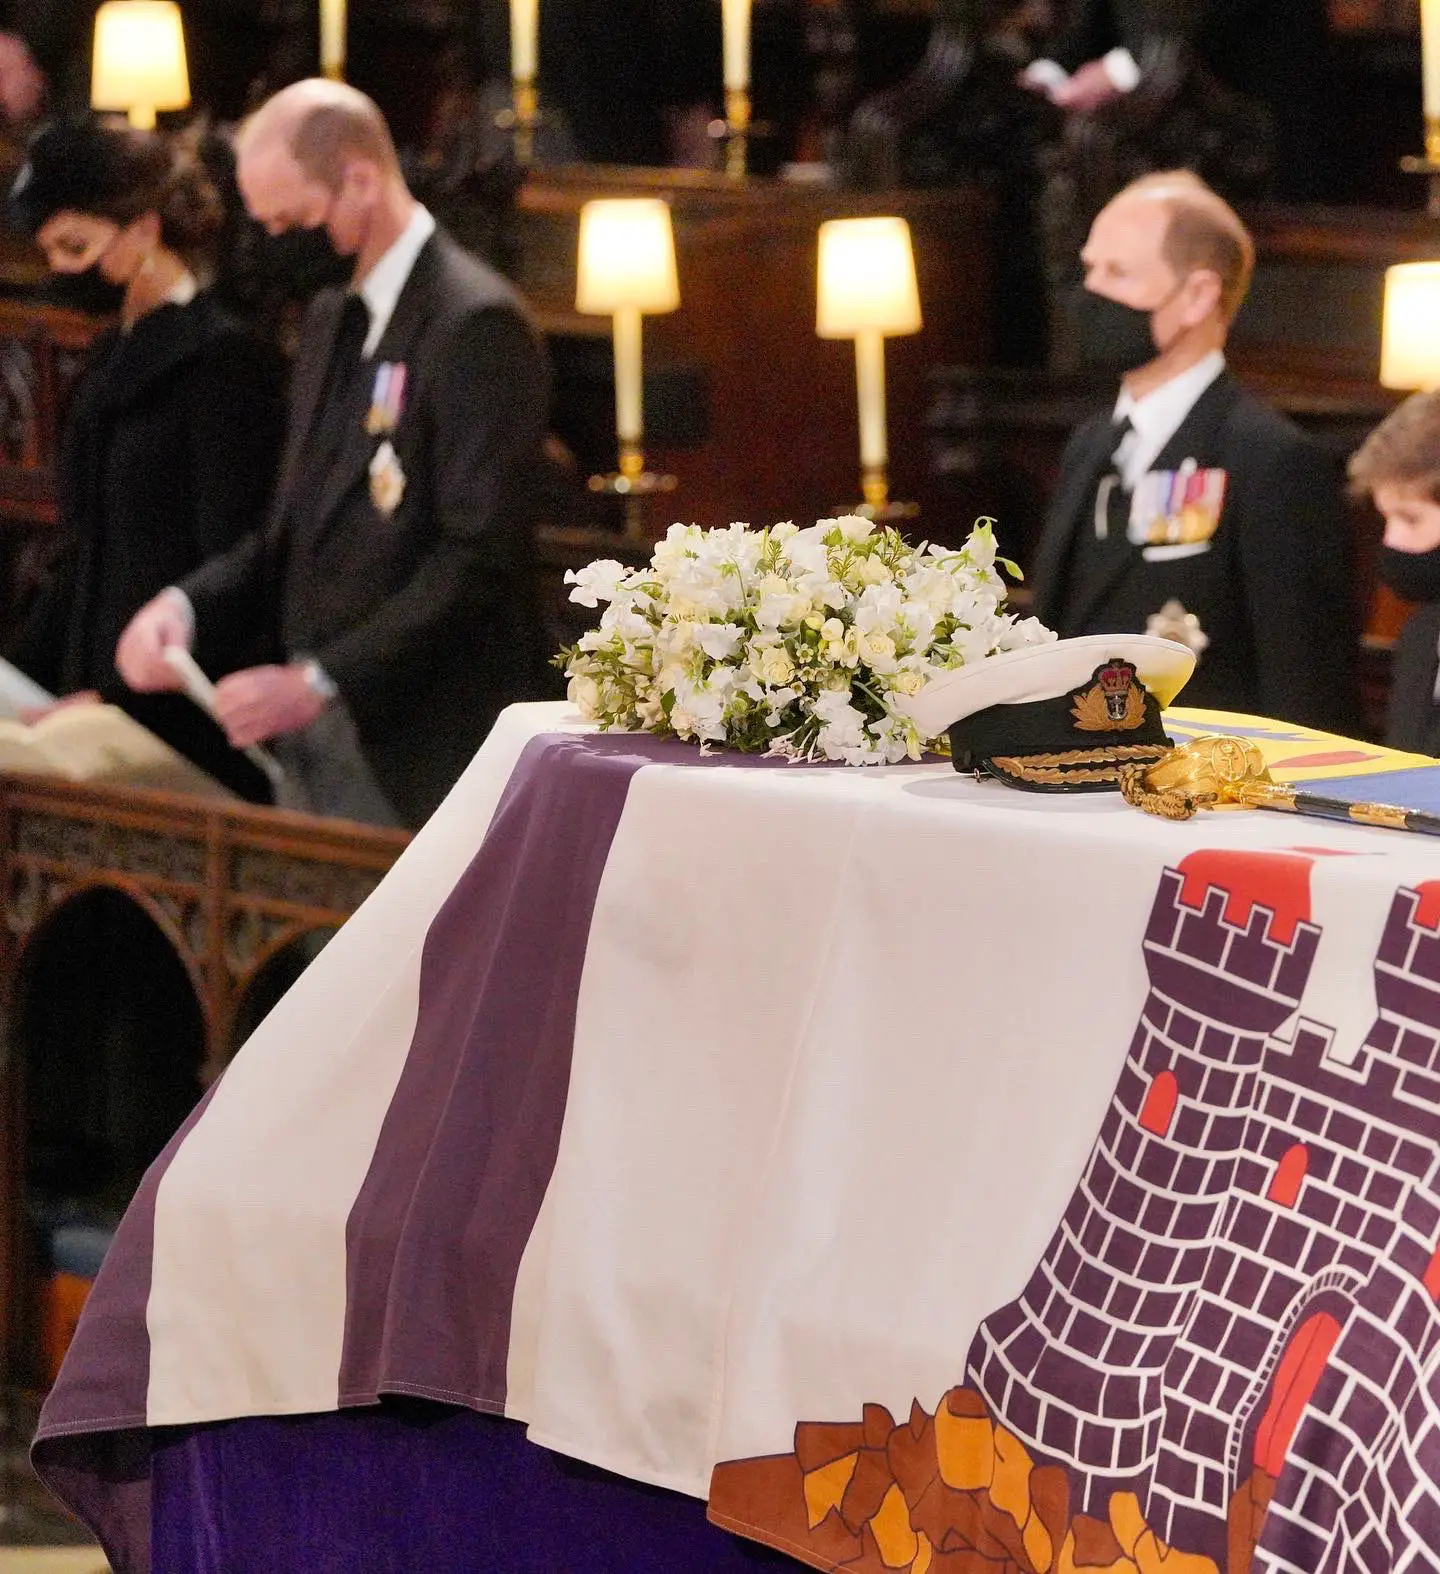 The Duke’s coffin was lowered into Royal Vault in a private moment.